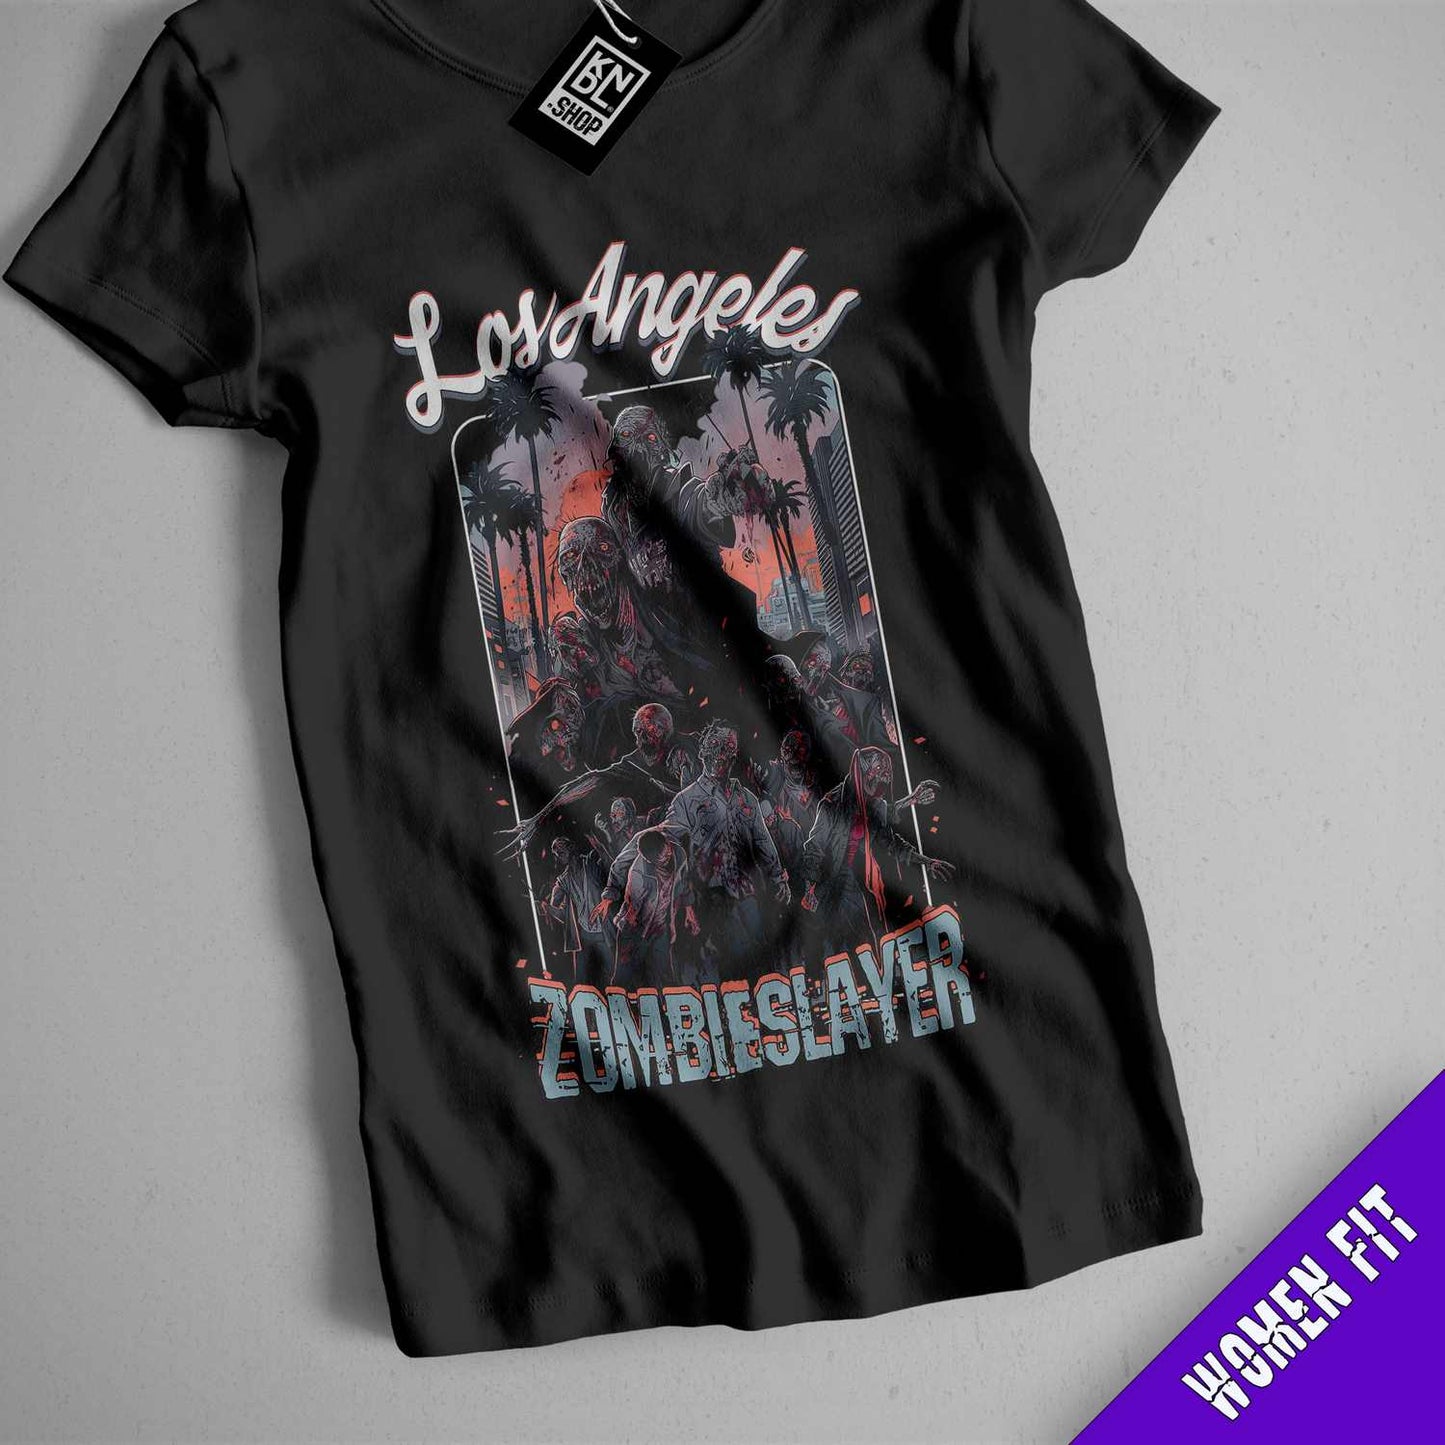 TEE NR 473 | LOS ANGELES ZOMBIE SLAYER | DEAD ISLAND INSPIRED SHORT SLEEVE T-SHIRT FOR M/F